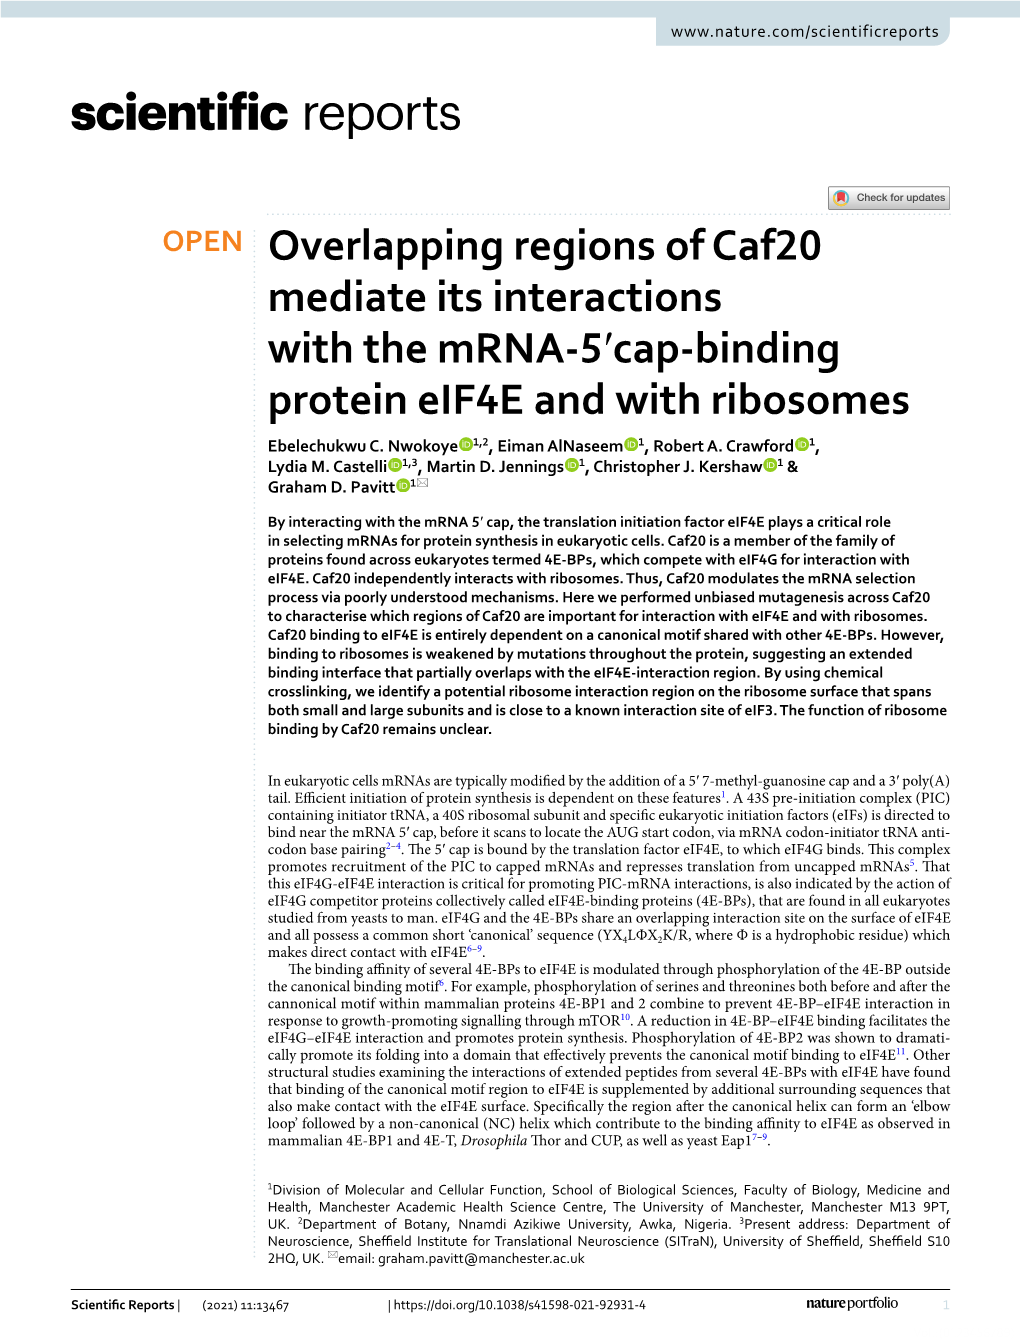 Cap-Binding Protein Eif4e and with Ribosomes